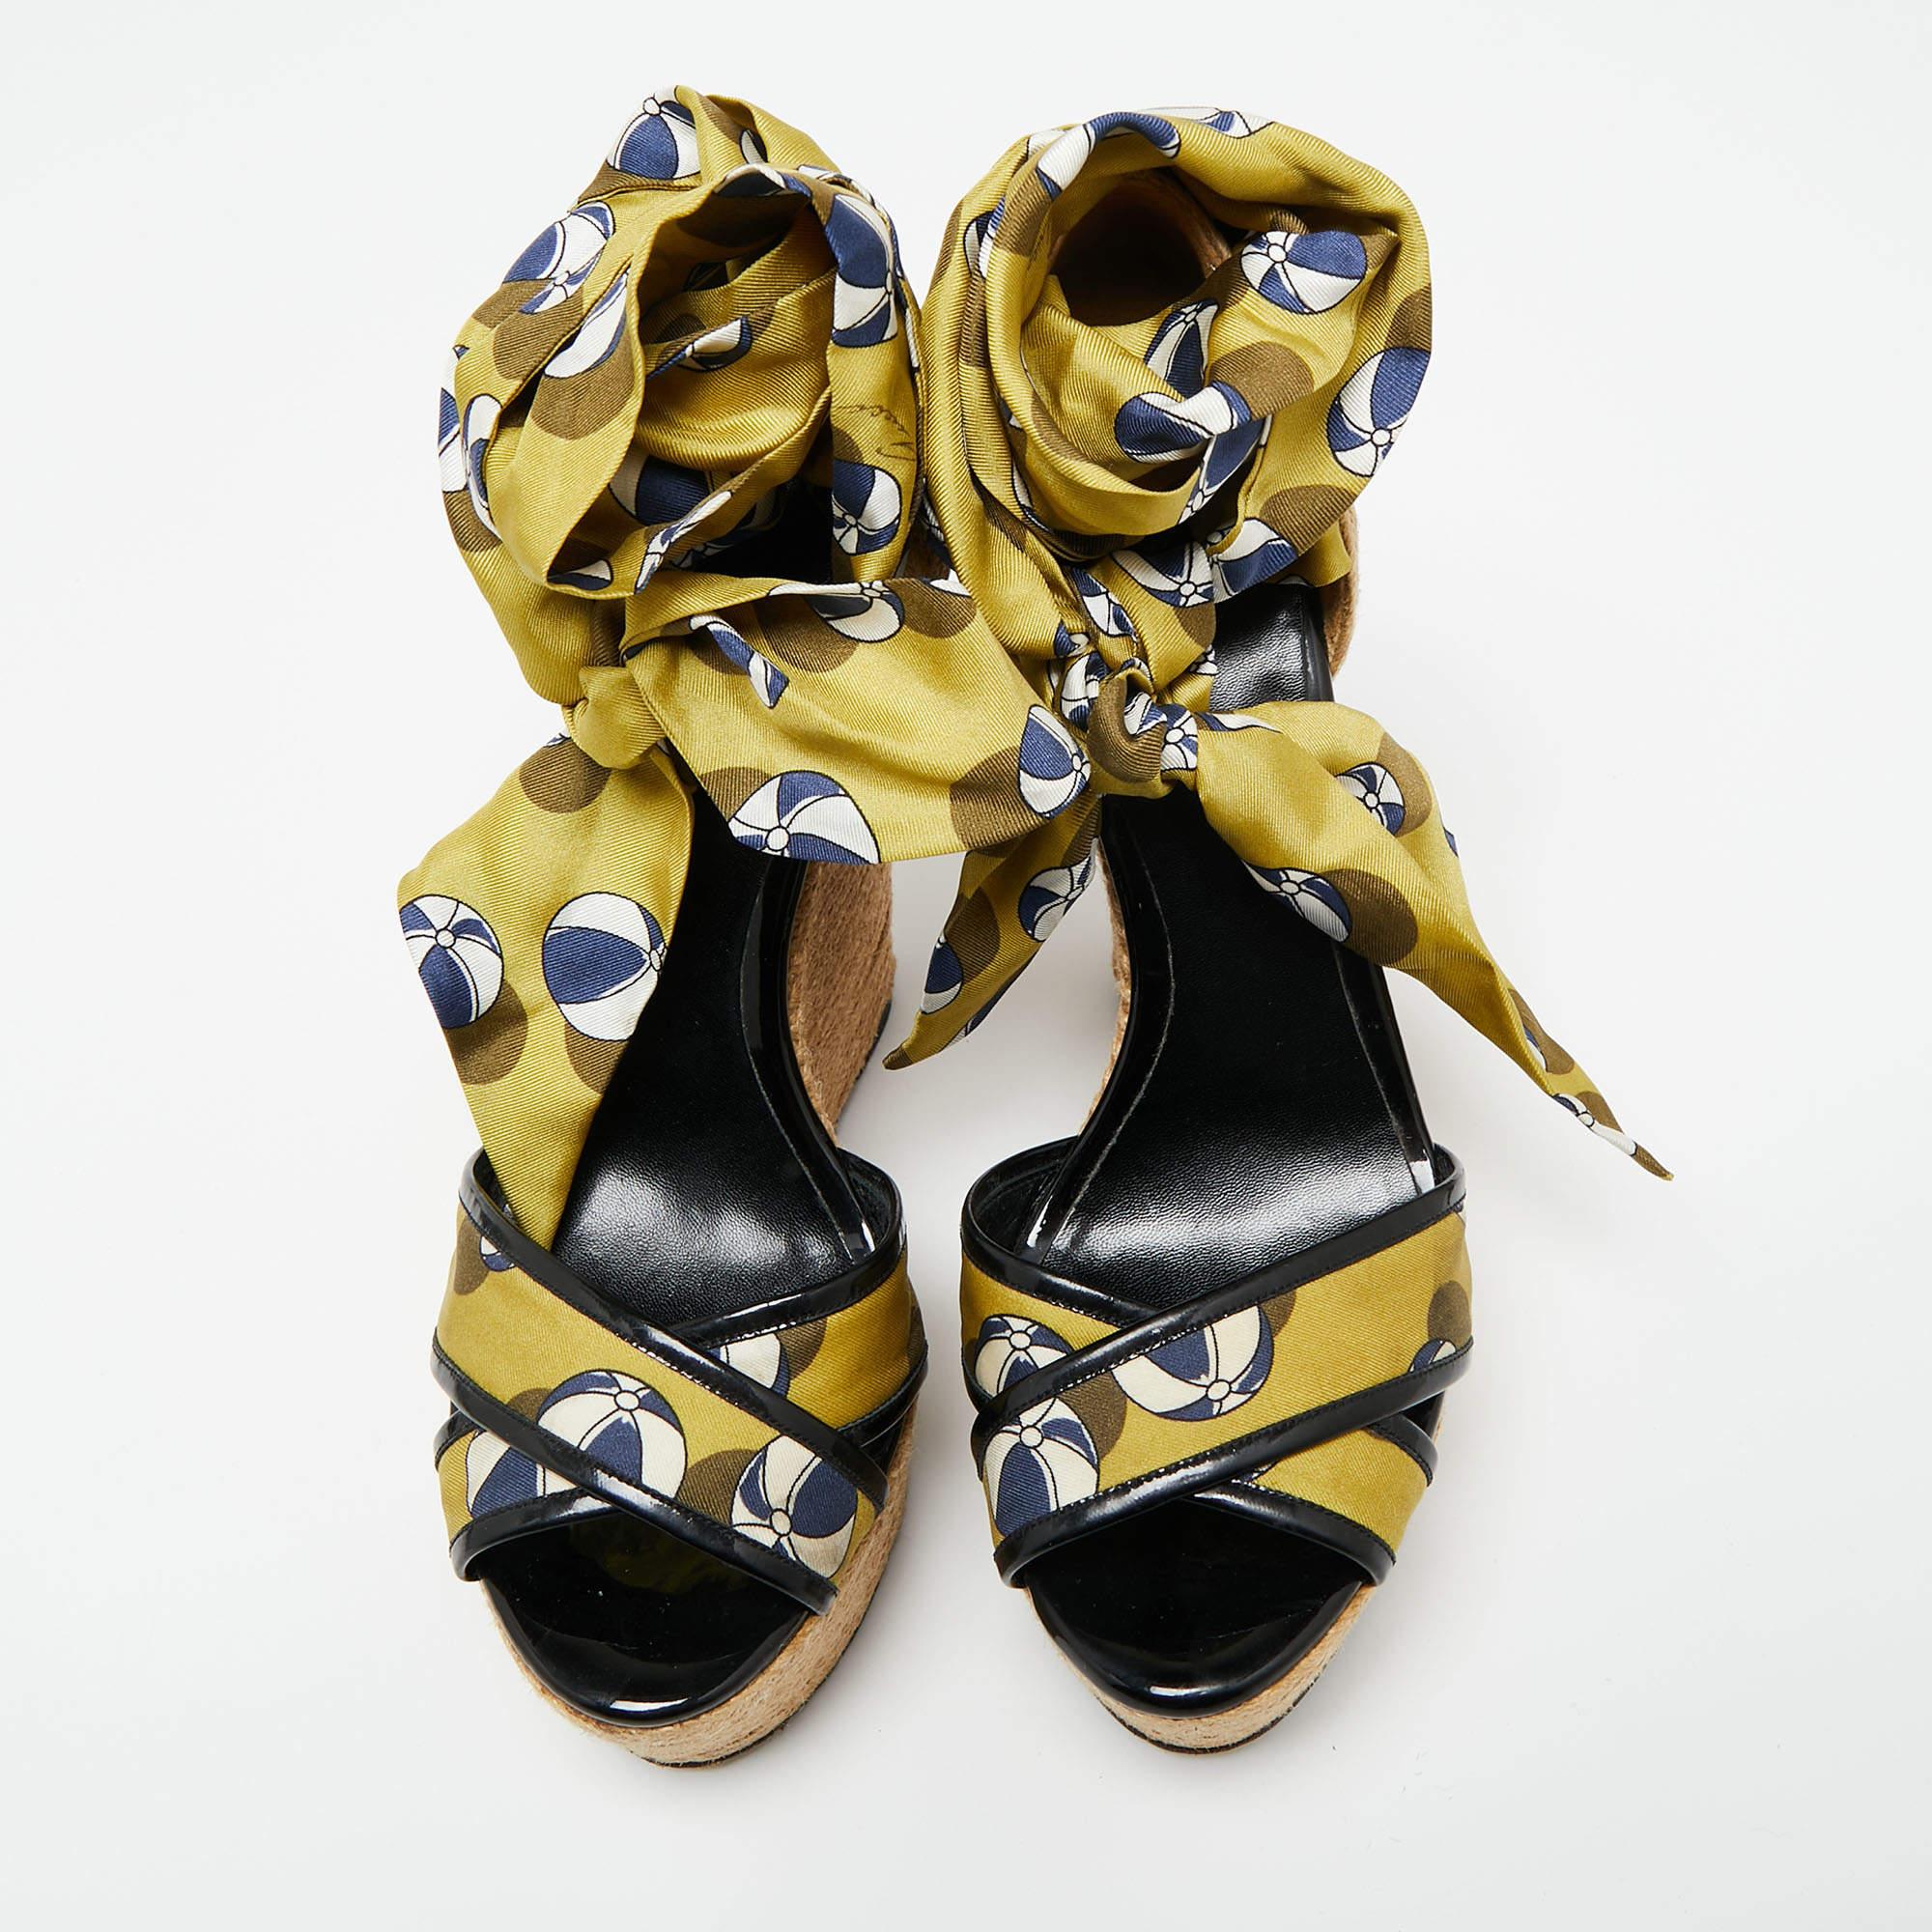 Stay comfortable throughout the day in these sandals by Gucci. Crafted to deliver drama and style, these stunning wedge sandals feature multicolored silk straps and ankle wrap detailing. They have an open toe silhouette, sturdy soles, and 15 cm